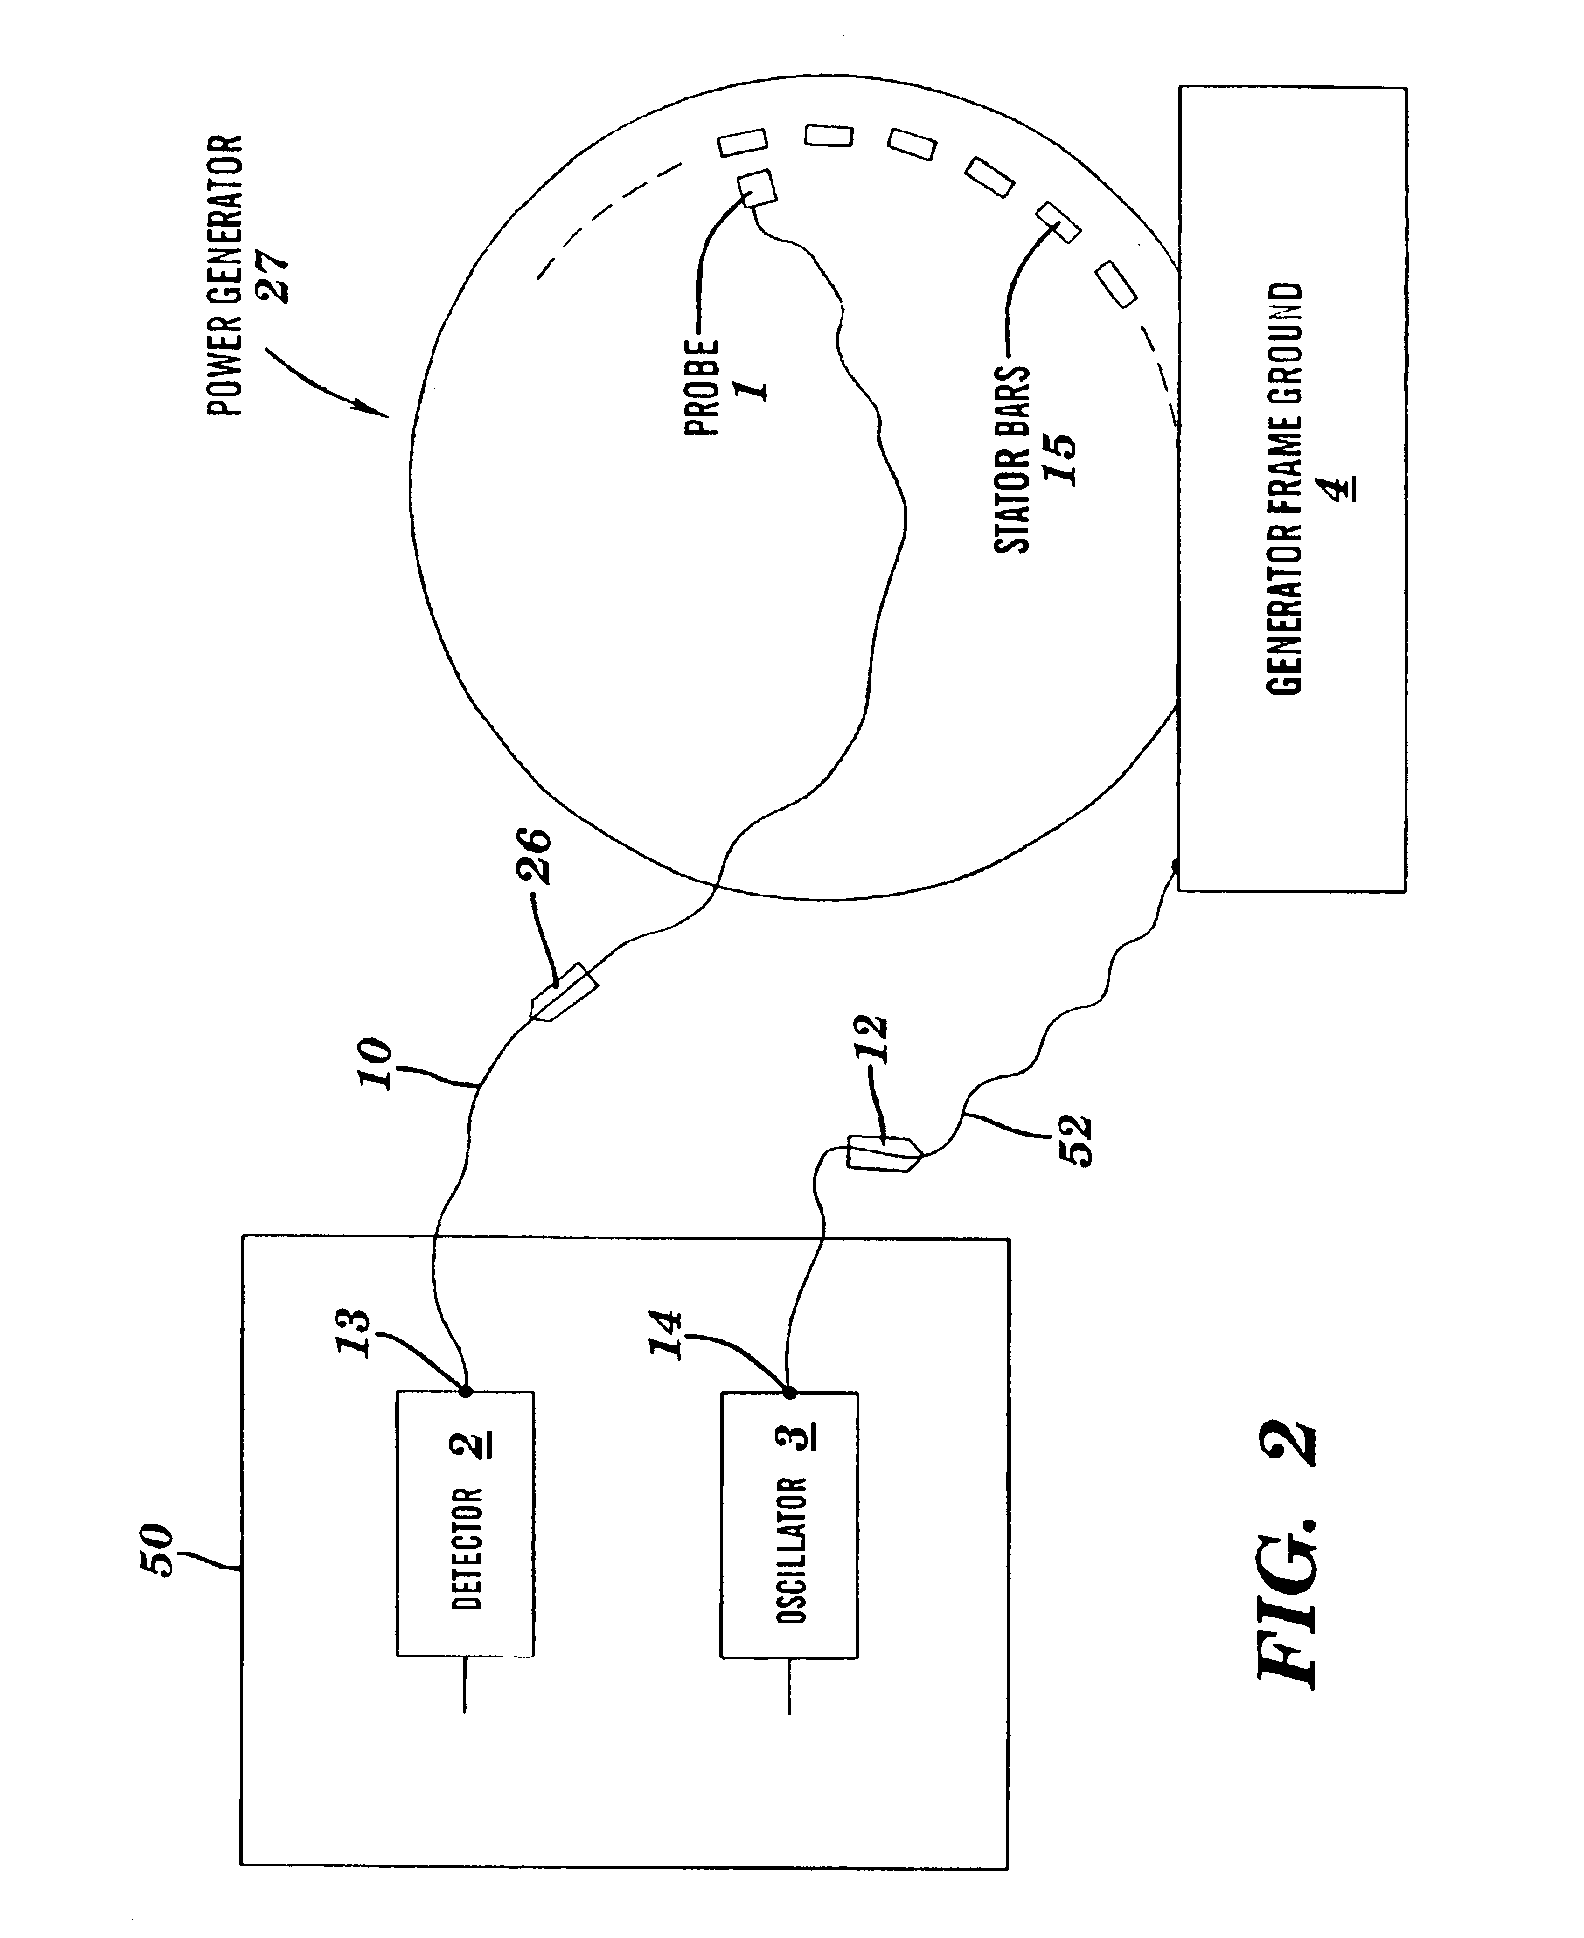 Apparatus and method to detect moisture